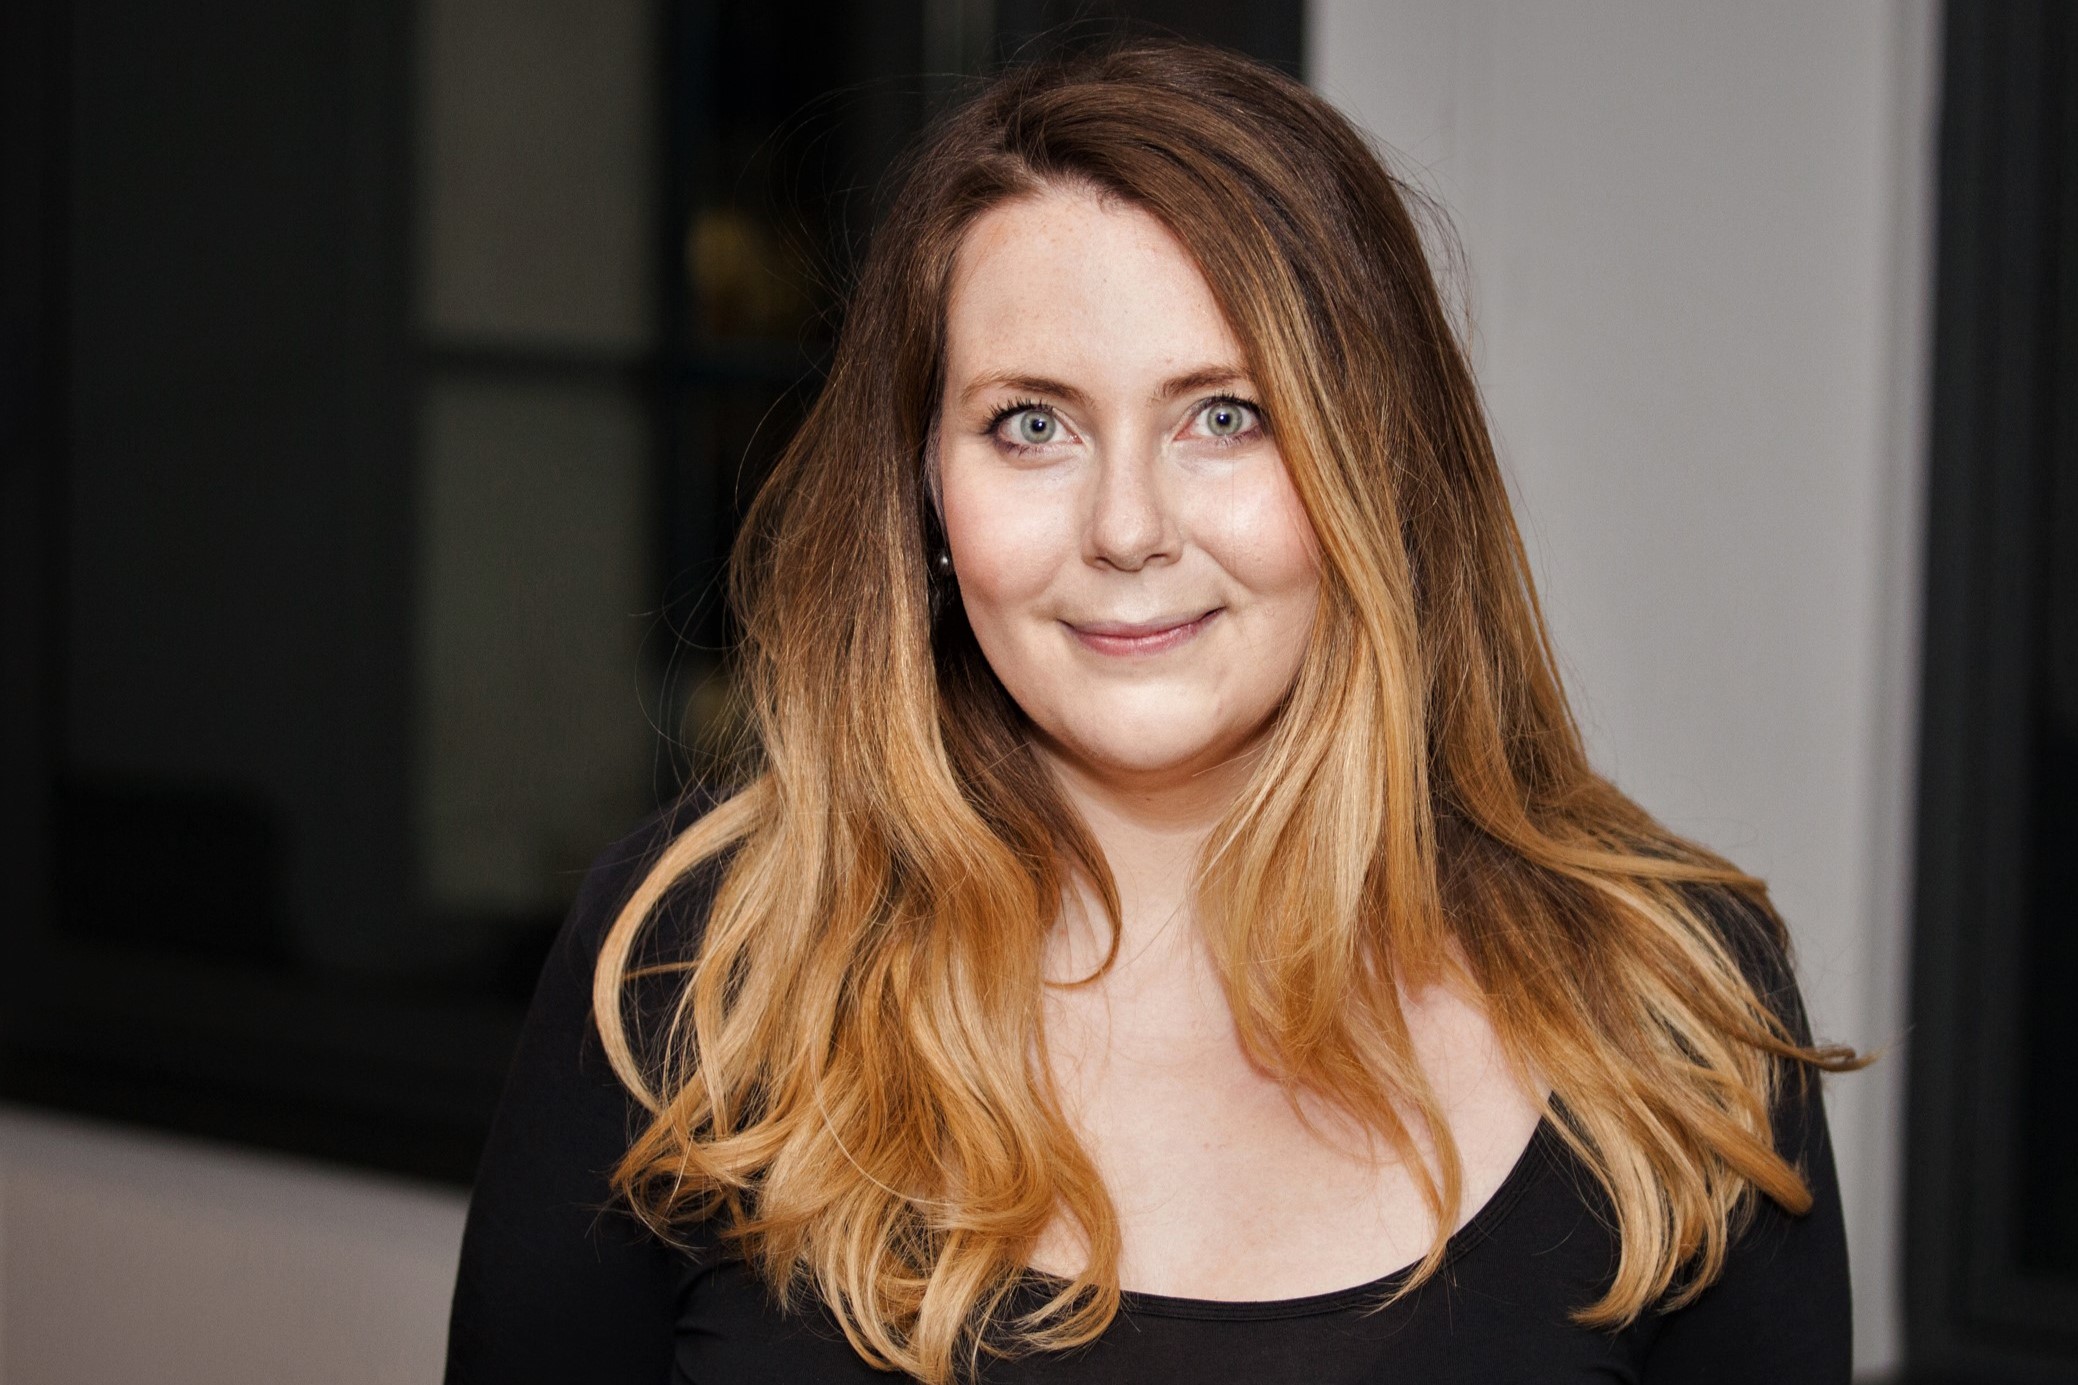 Jemma Waters, Head of Digital Impact and Inclusion at Lloyds Banking Group